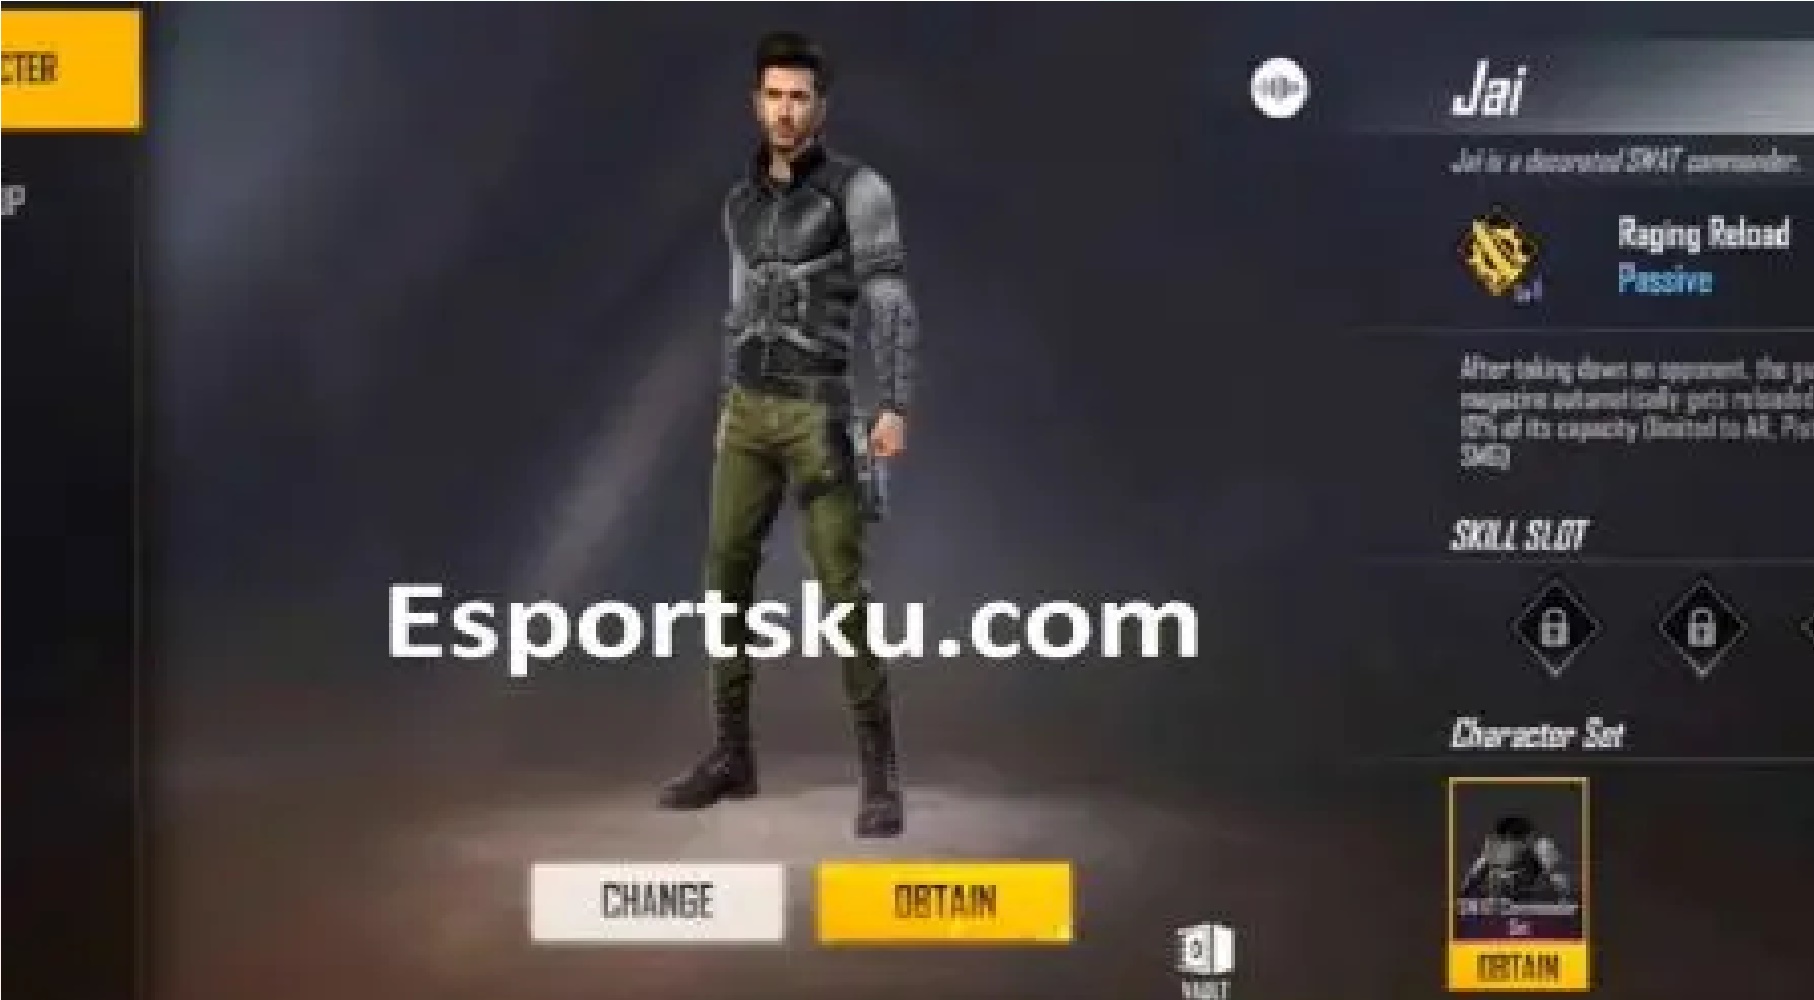 How To Obtain The New Character Jai In Free Fire Ff Esportsku